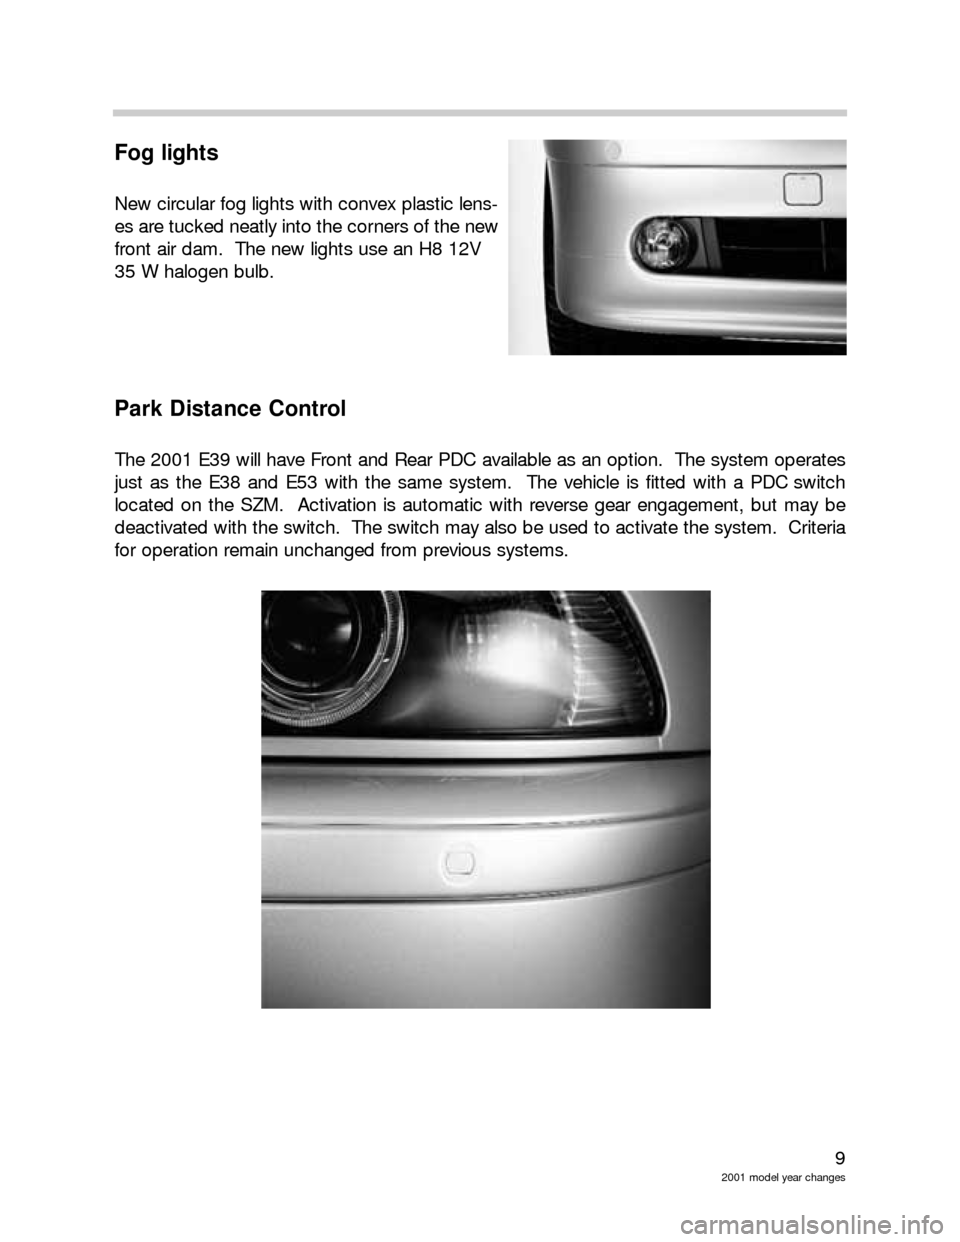 BMW Z8 2003 E52 Model Yar Changes 9
2001 model year changes
Fog lights
New circular fog lights with convex plastic lens-
es are tucked neatly into the corners of the new
front air dam.  The new lights use an H8 12V 
35 W halogen bulb.